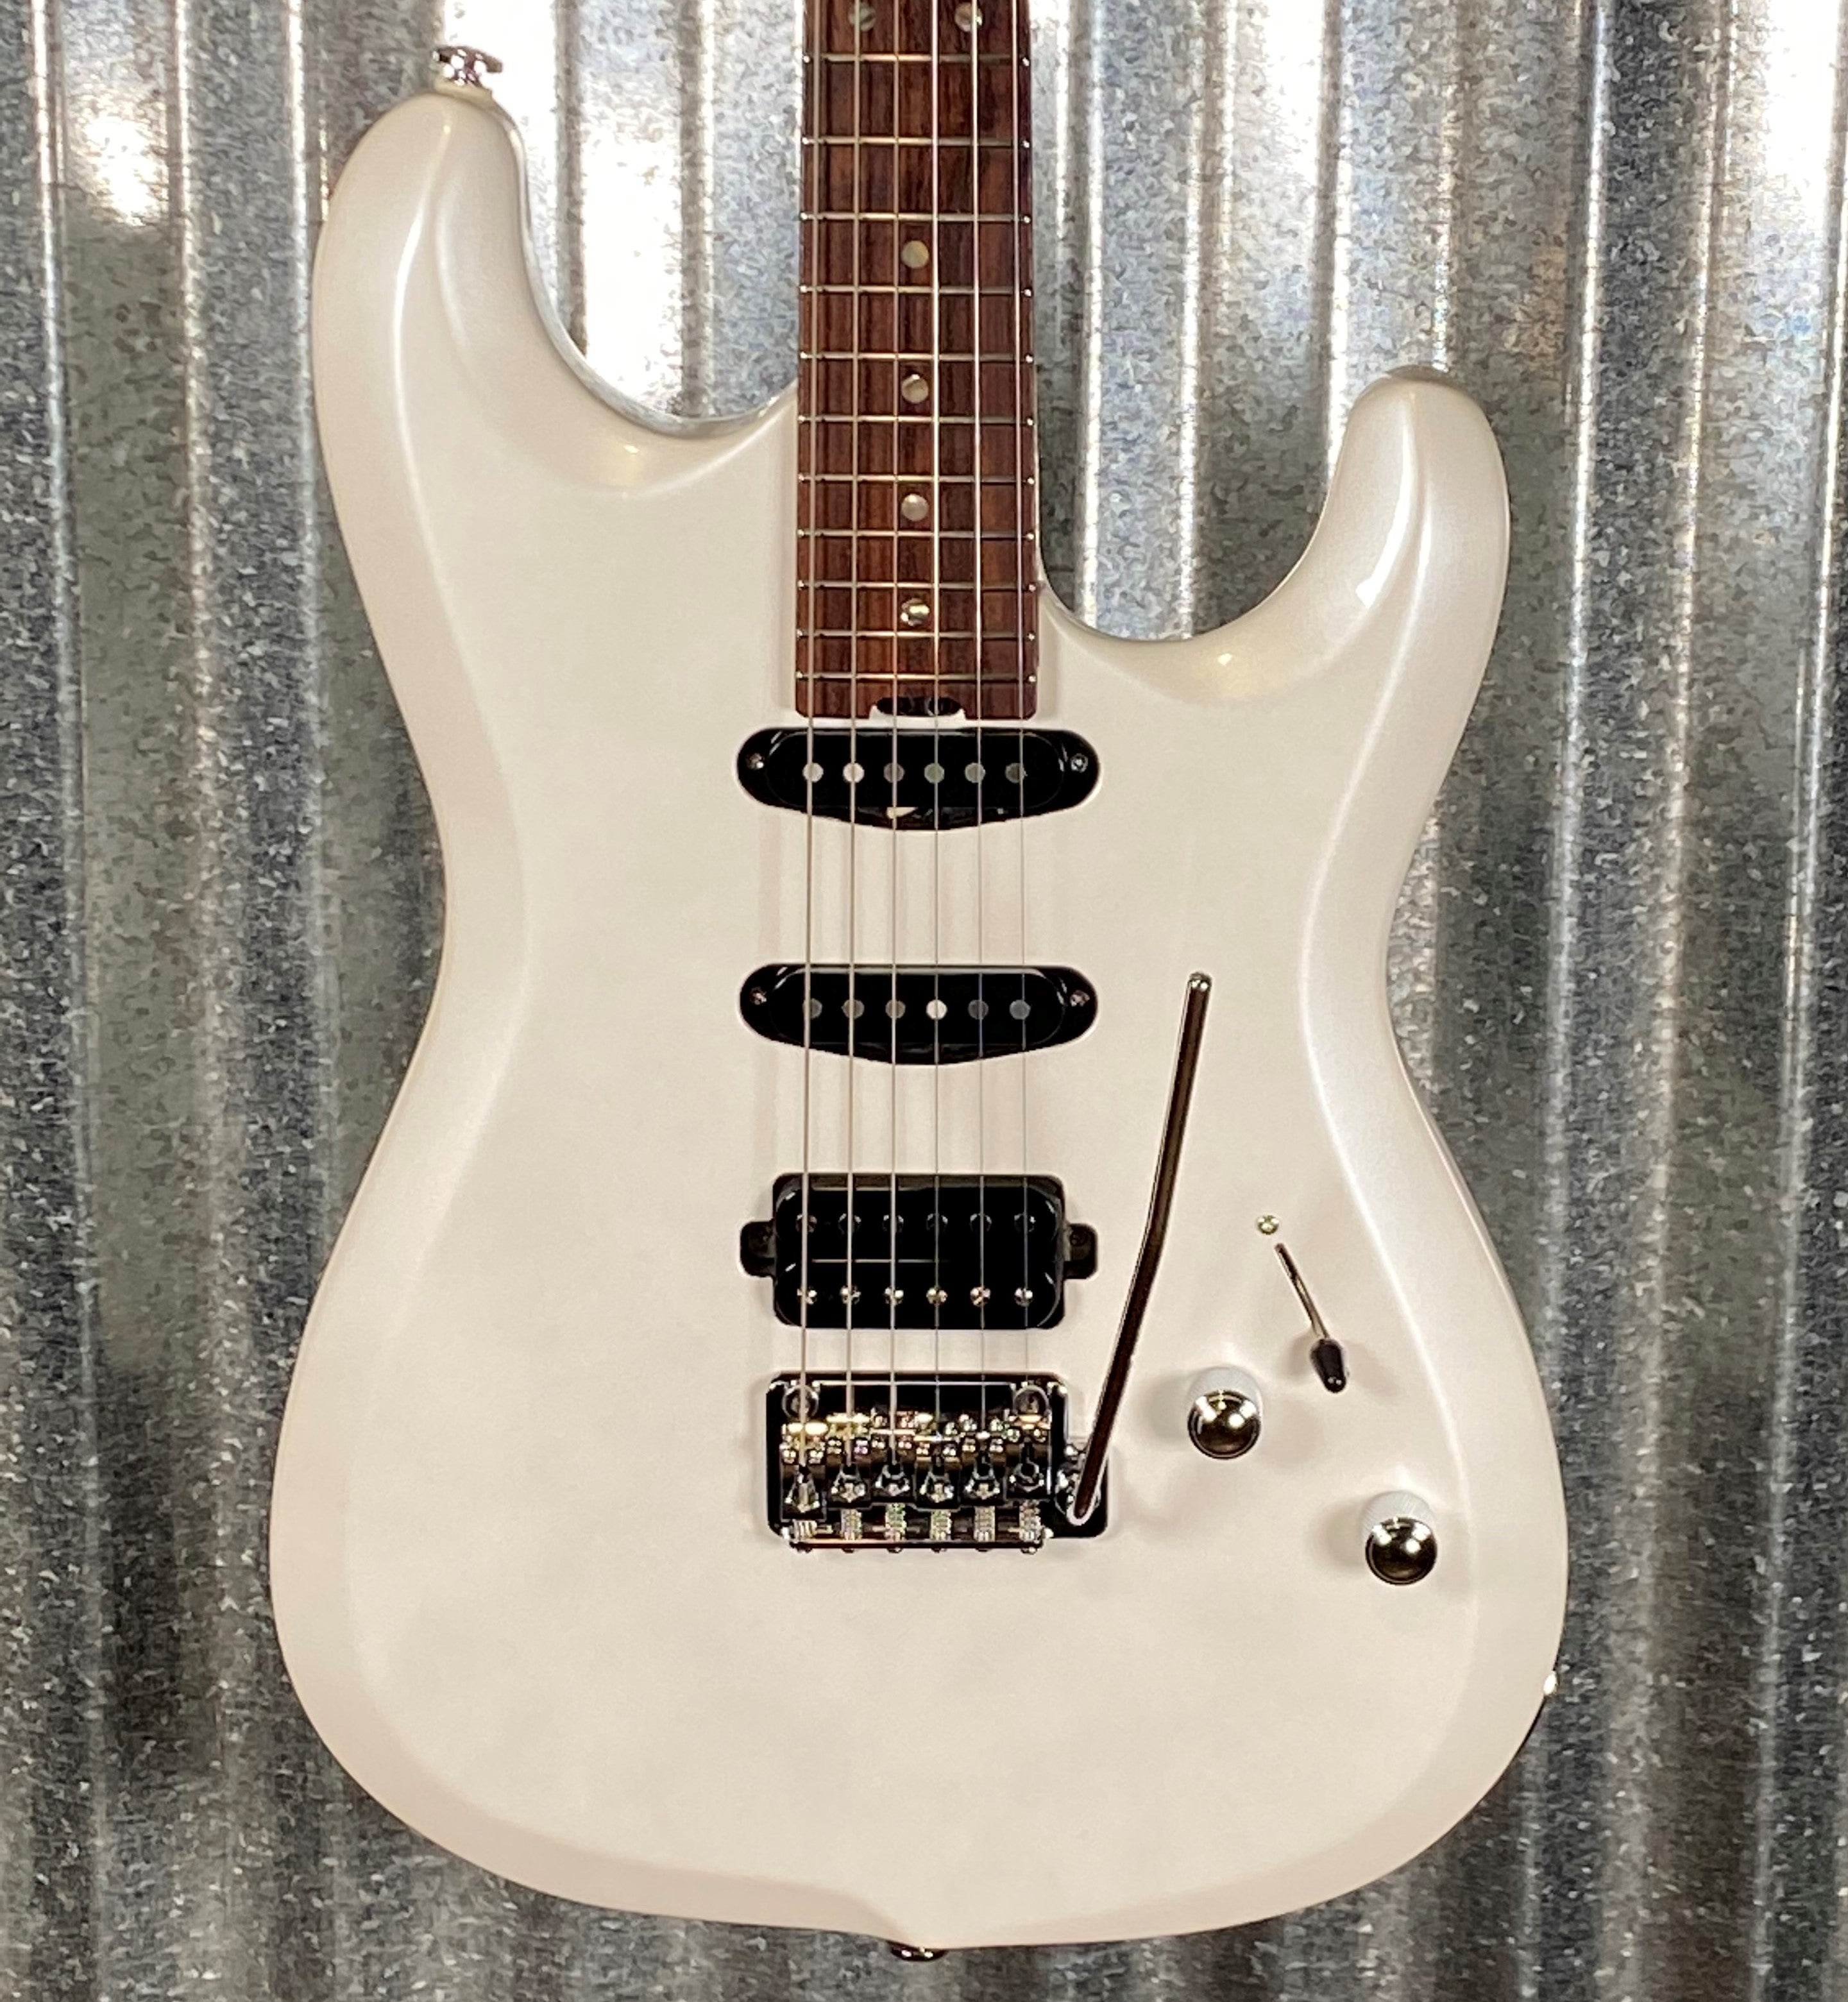 Musi Capricorn Fusion HSS Superstrat Pearl White Guitar #0130 Used –  Specialty Traders